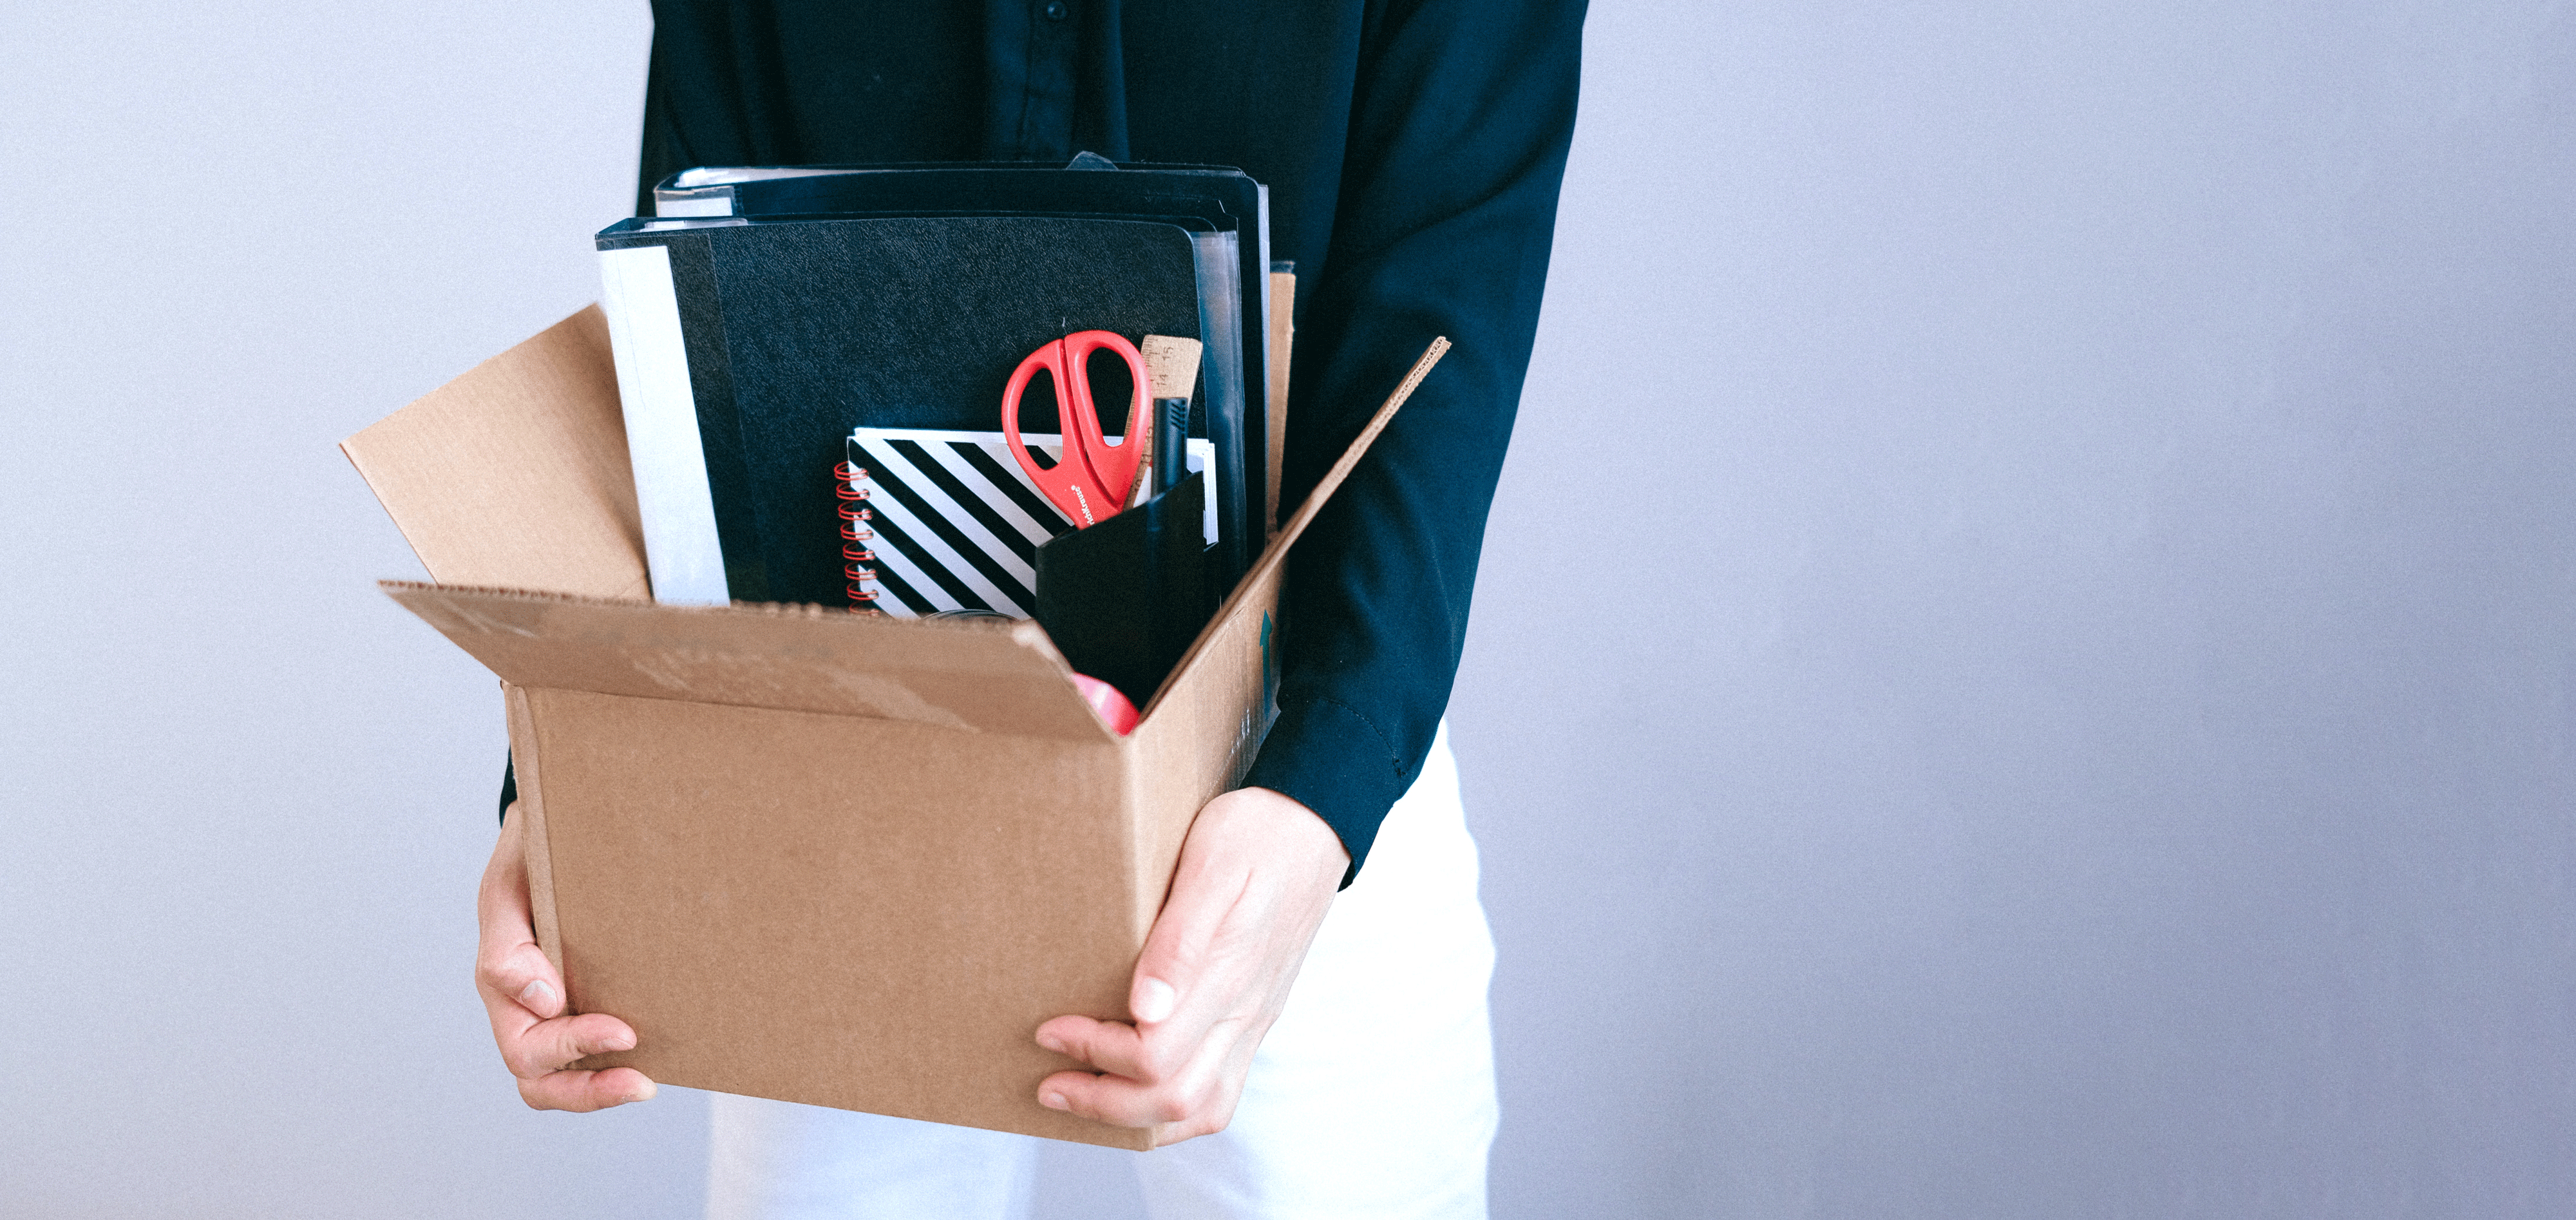 Person holding a cardboard box with red scissors, papers, pens, and various office supplies